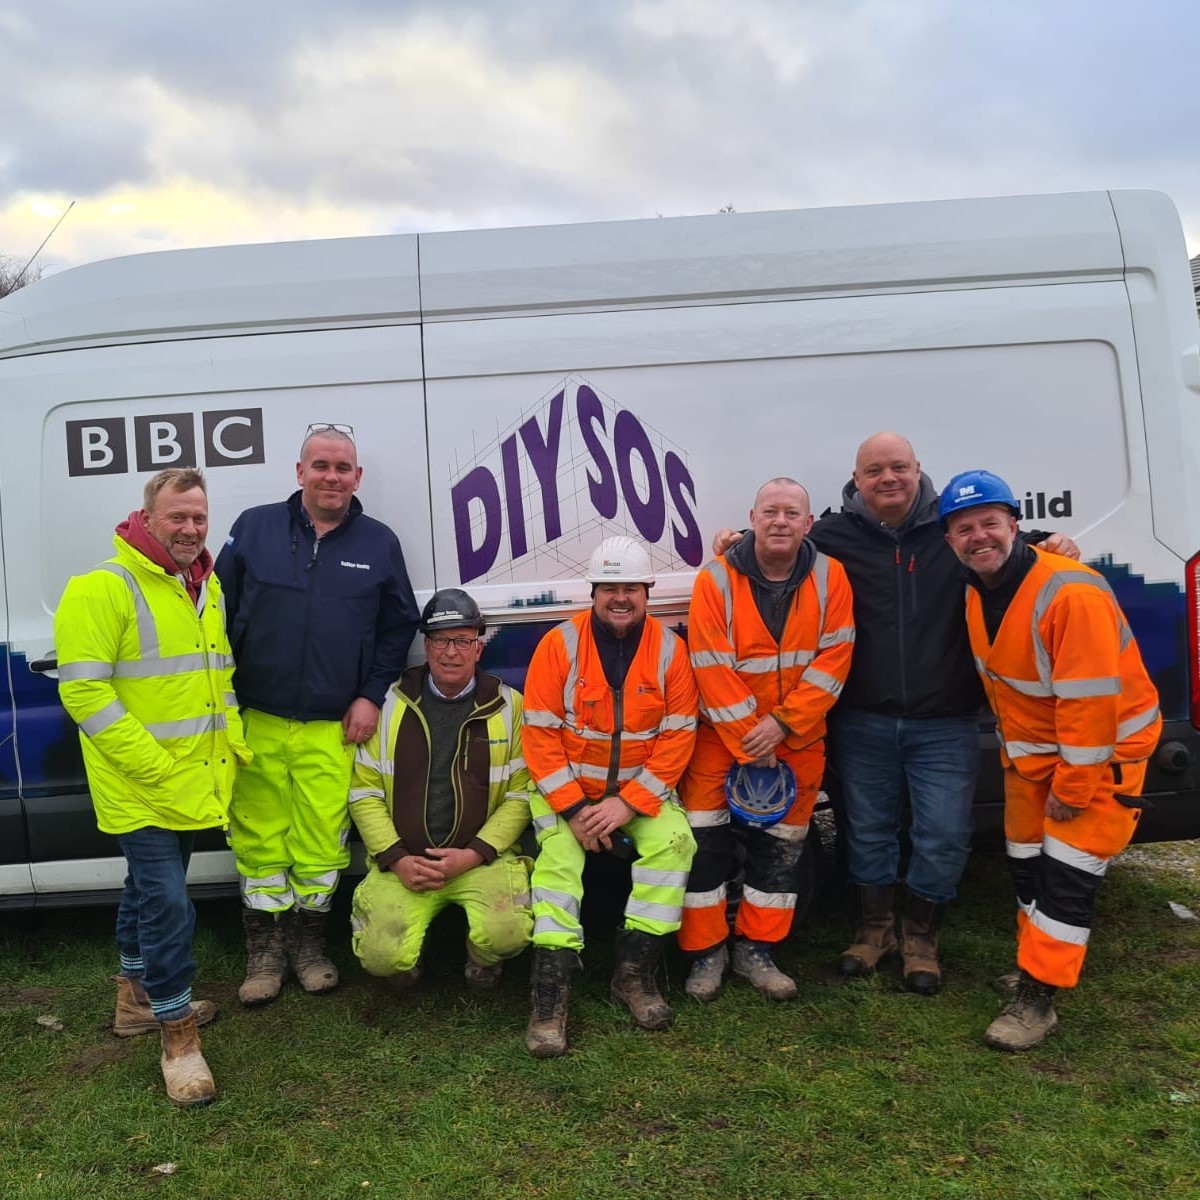 McDermotts and Balfour Beatty colleagues volunteered to prepare a patch of dead space land so that DIY SOS could building an amazing community centre in Stoke.